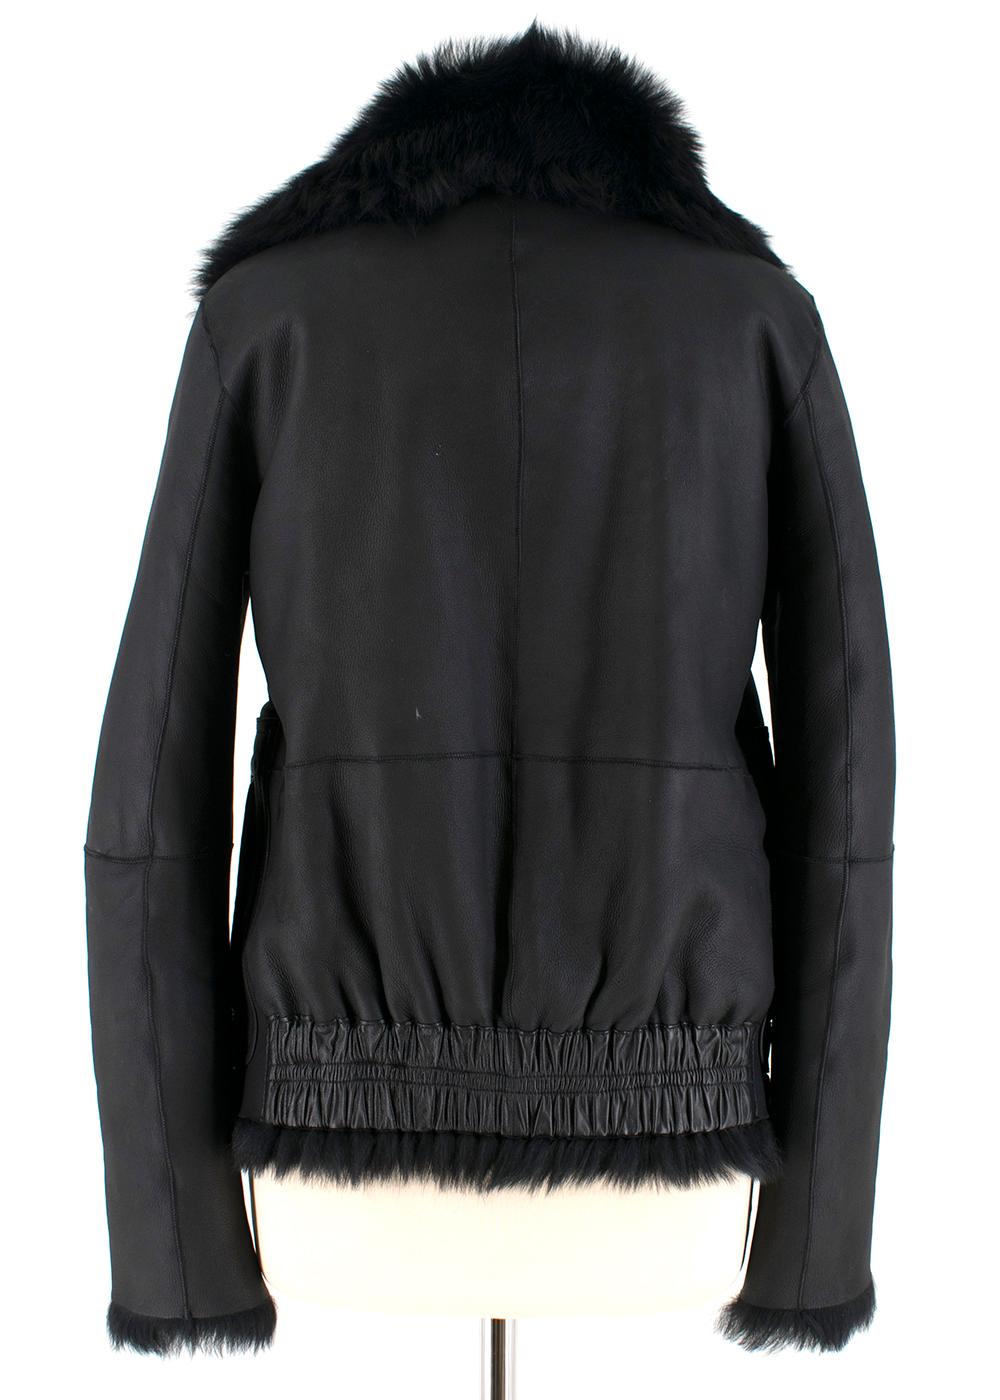 Jil Sander Black Fur Lined Leather Jacket 36 XS In Excellent Condition For Sale In London, GB